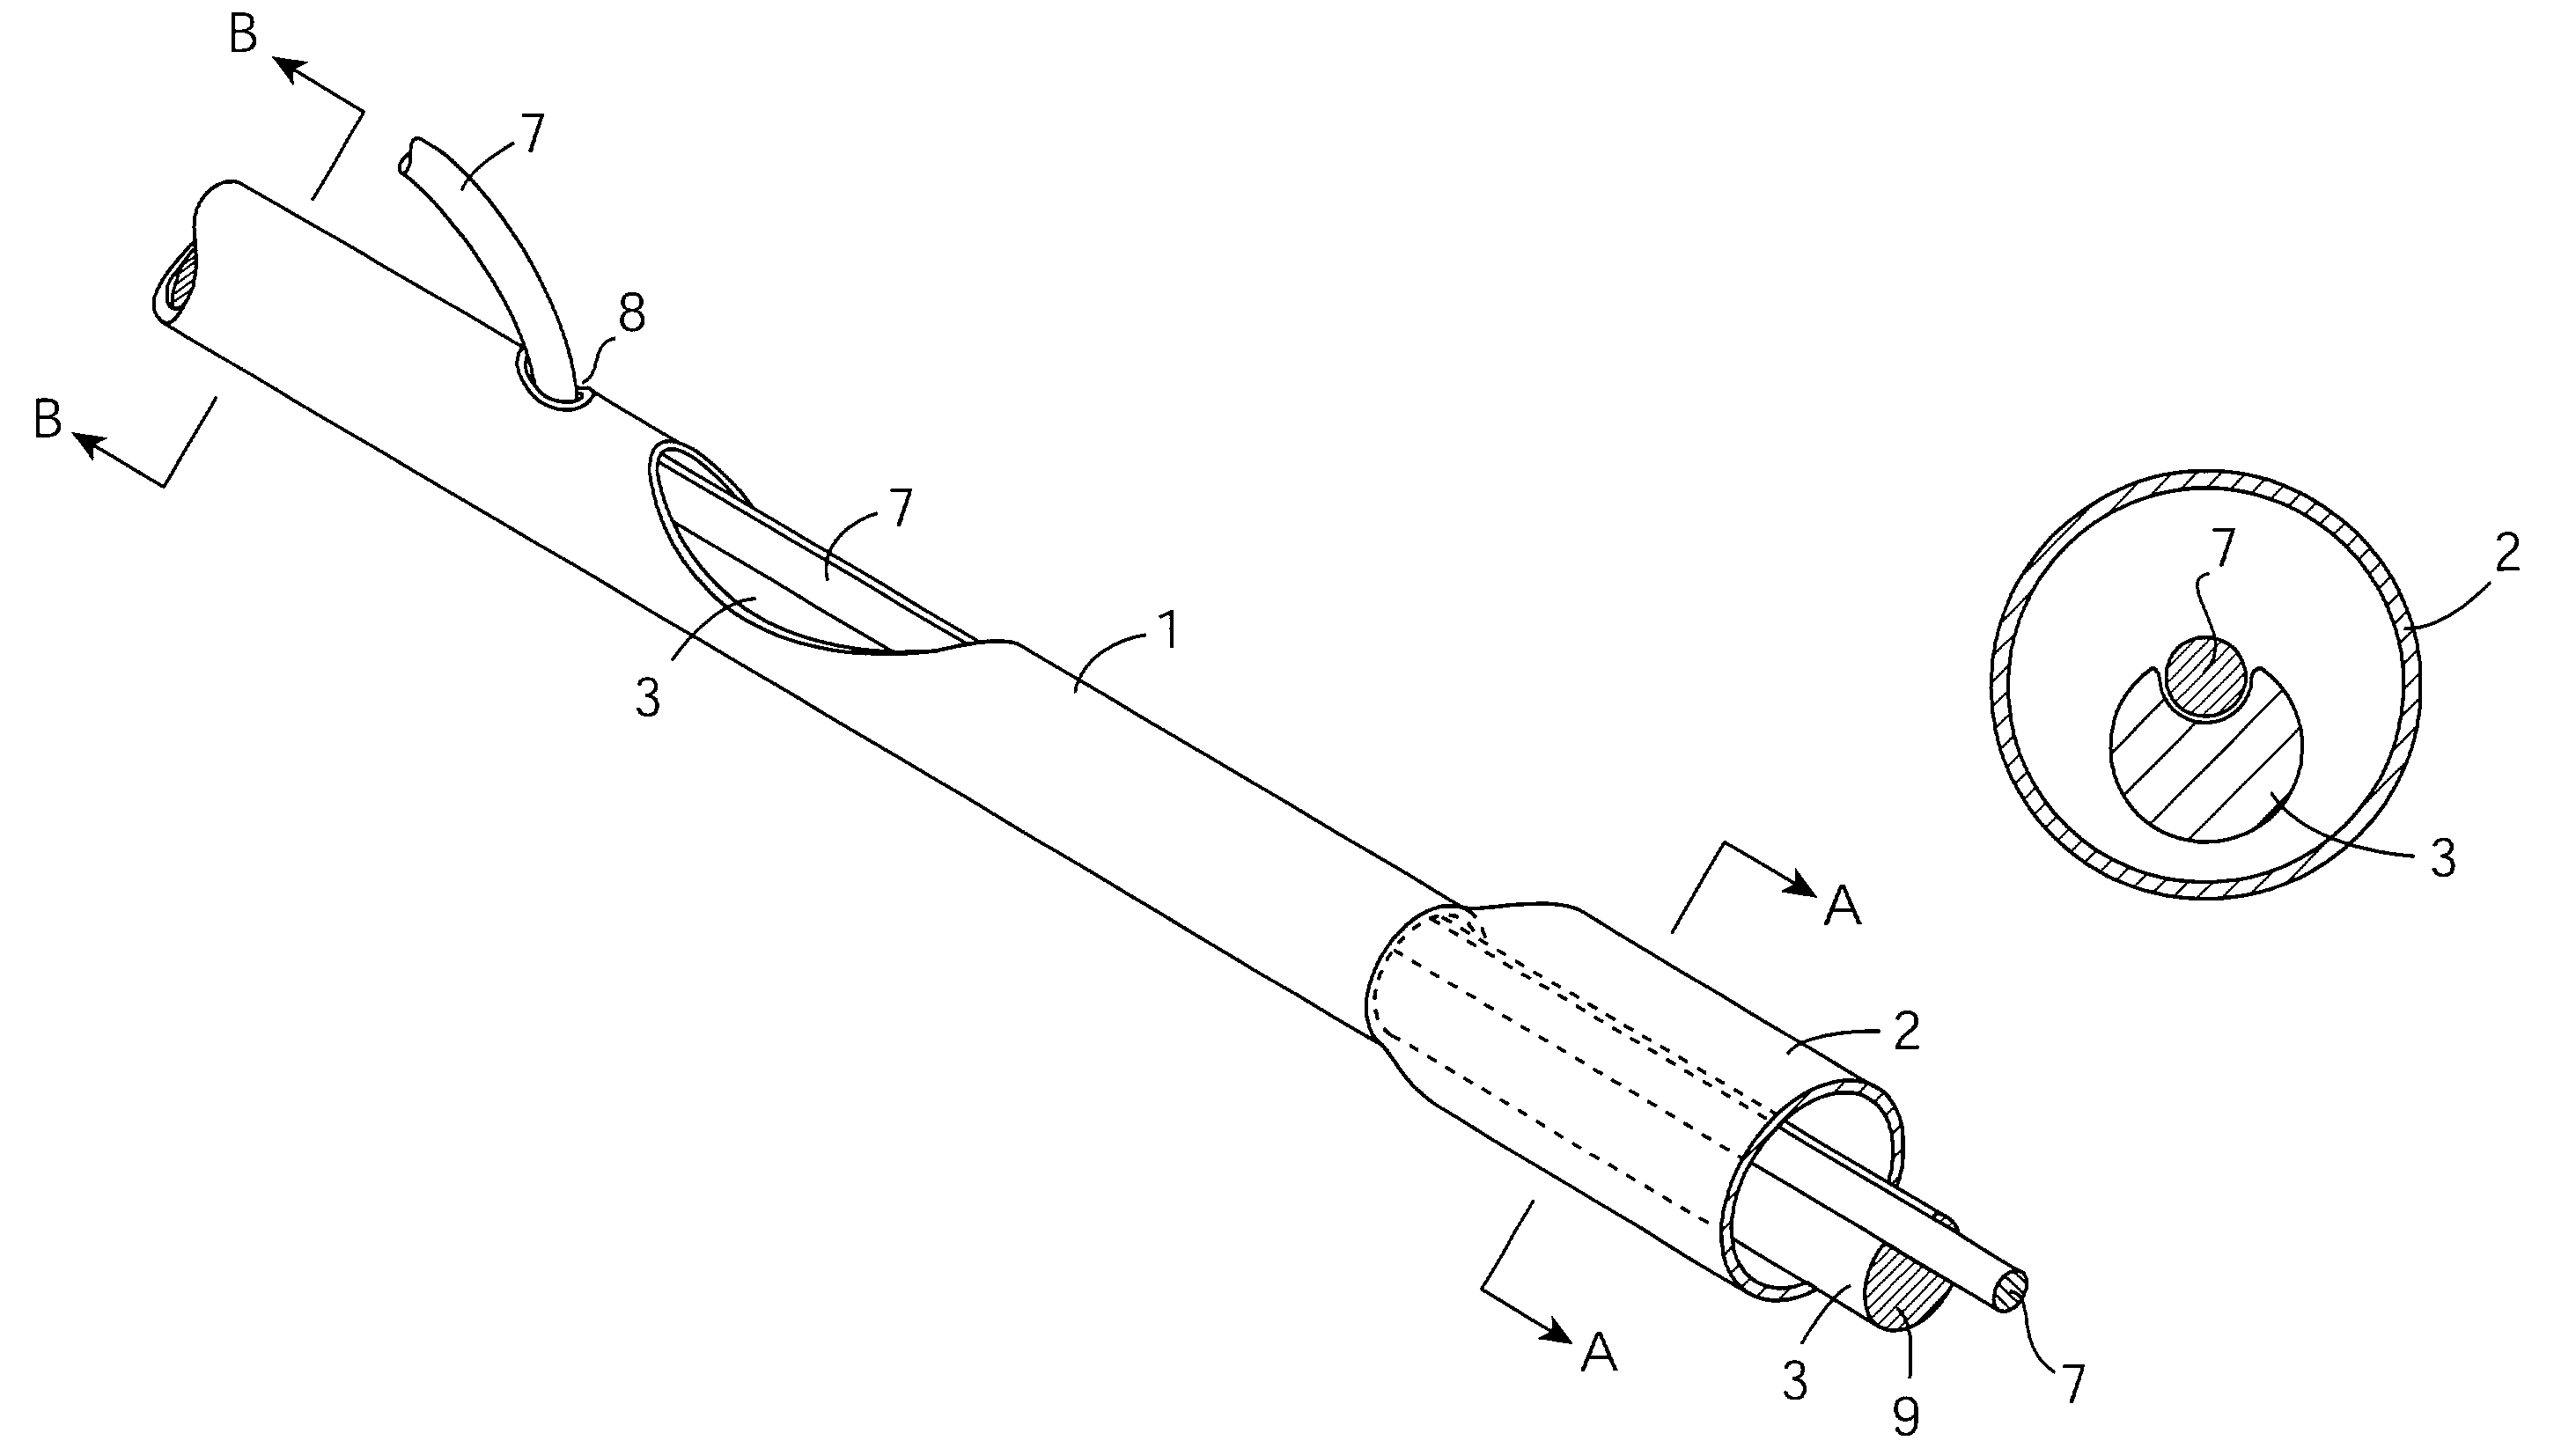 Catheter for delivery and/or retrieval of a medical device